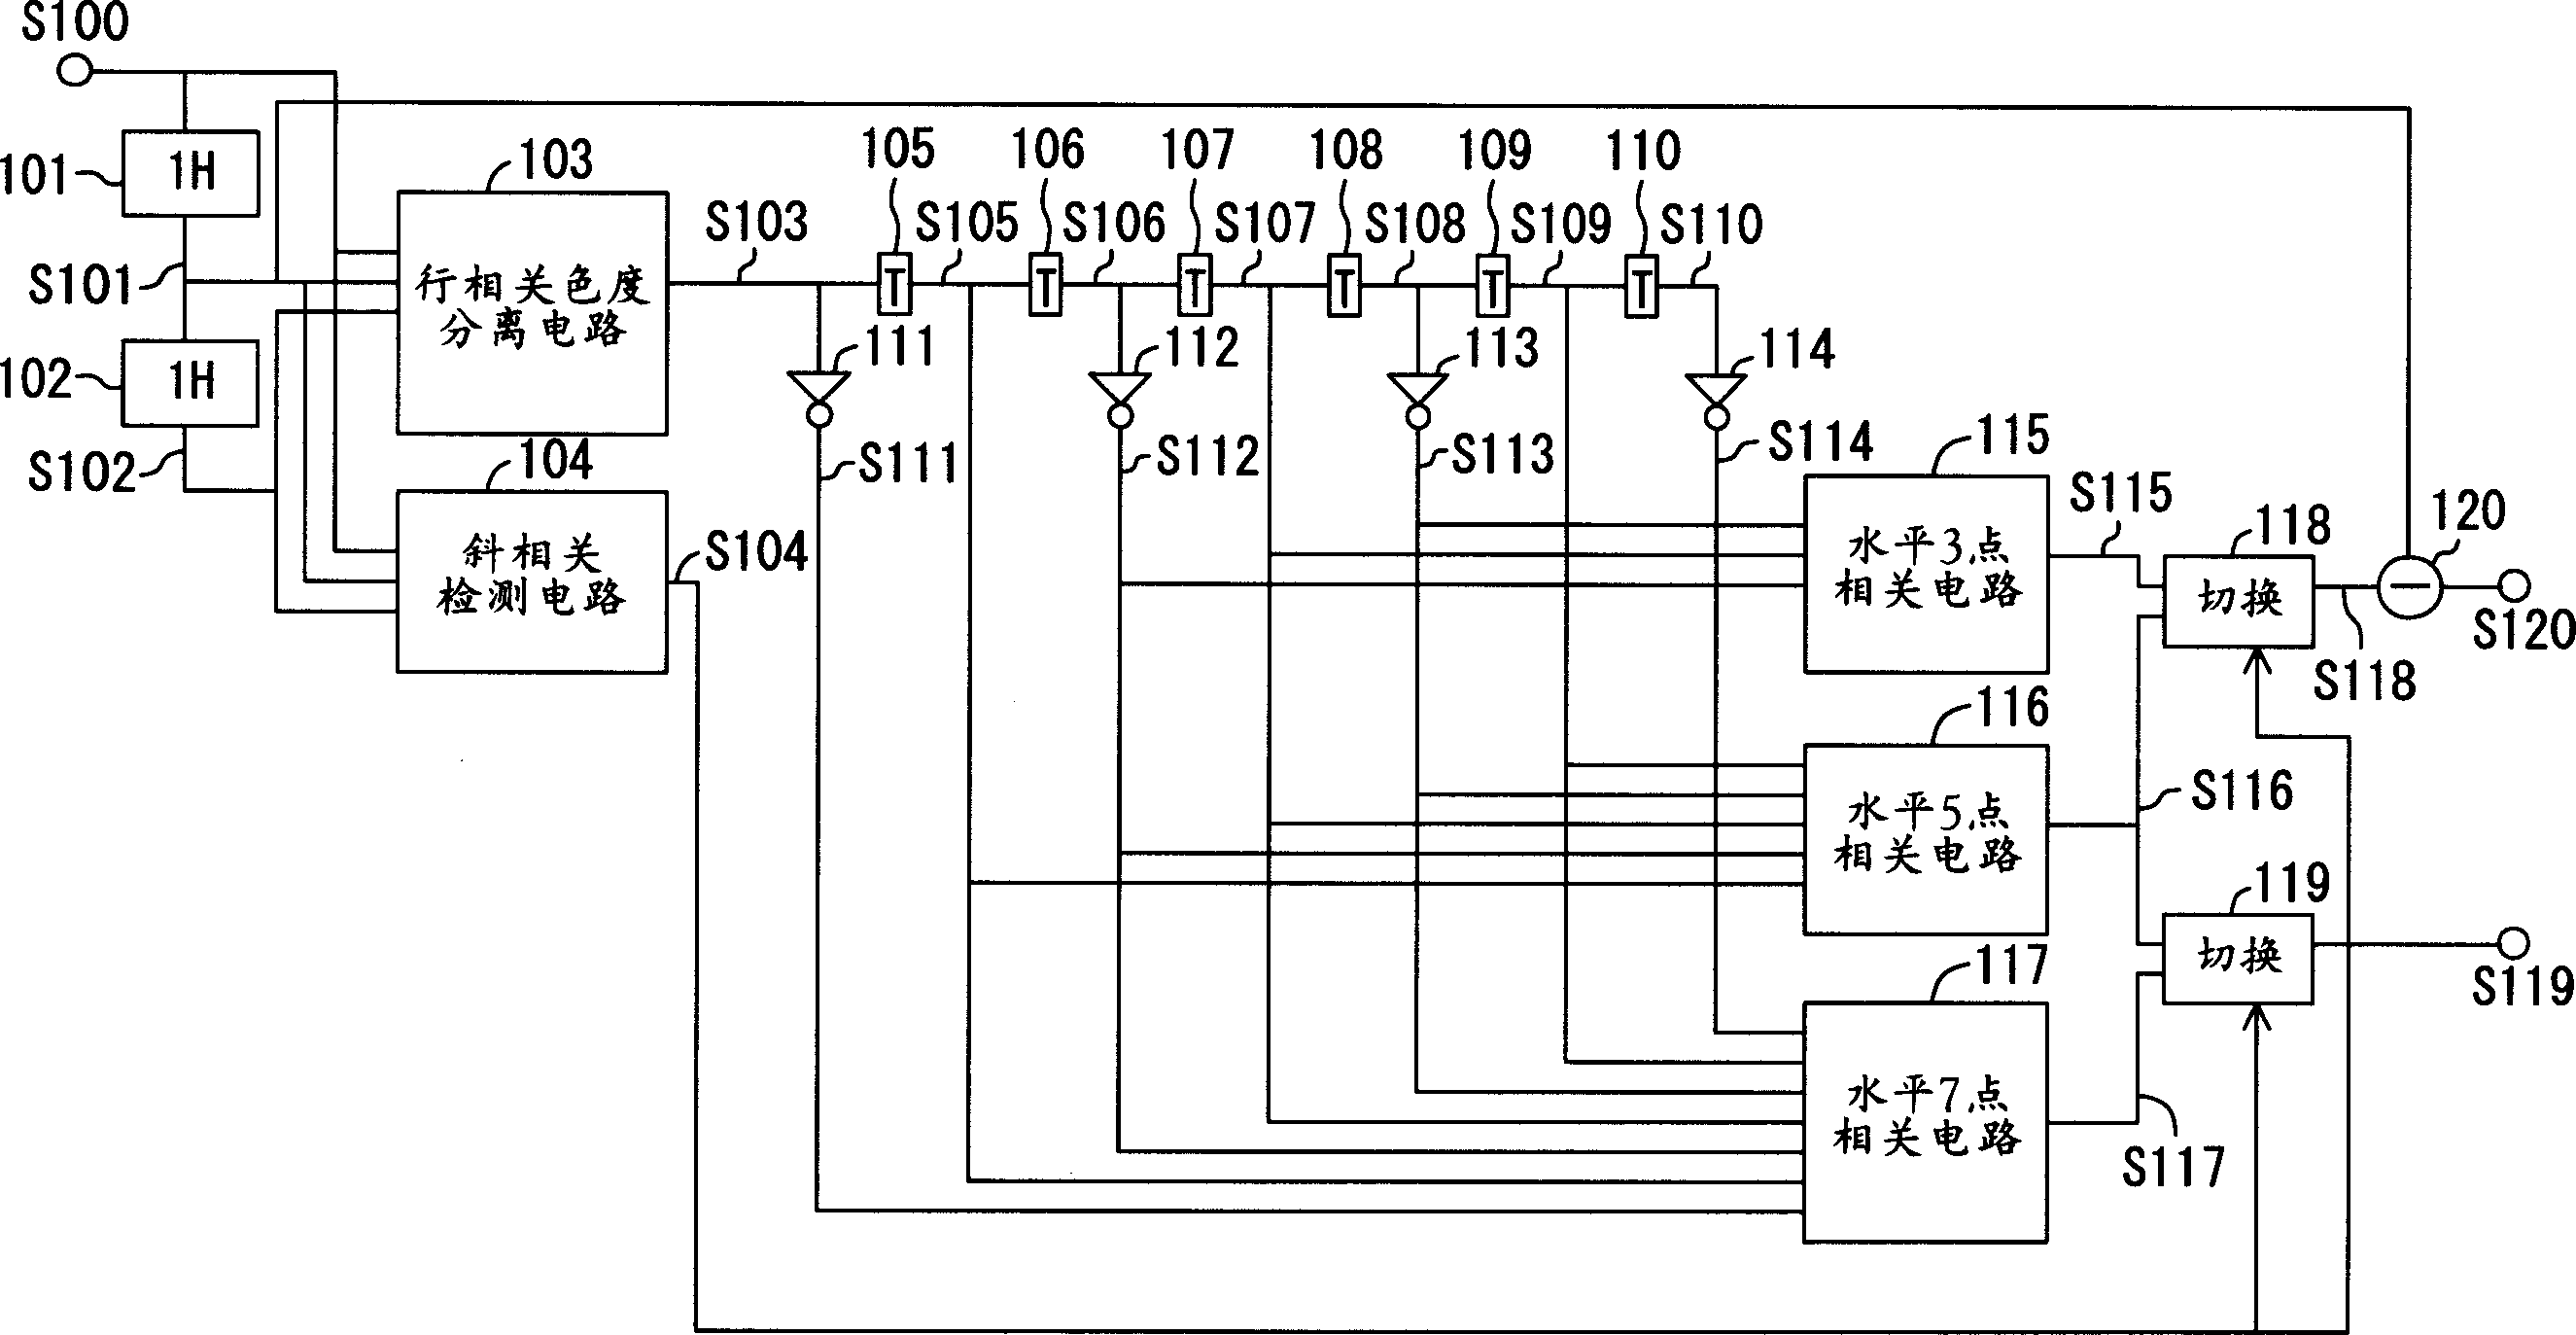 Image signal processor and image signal processing method